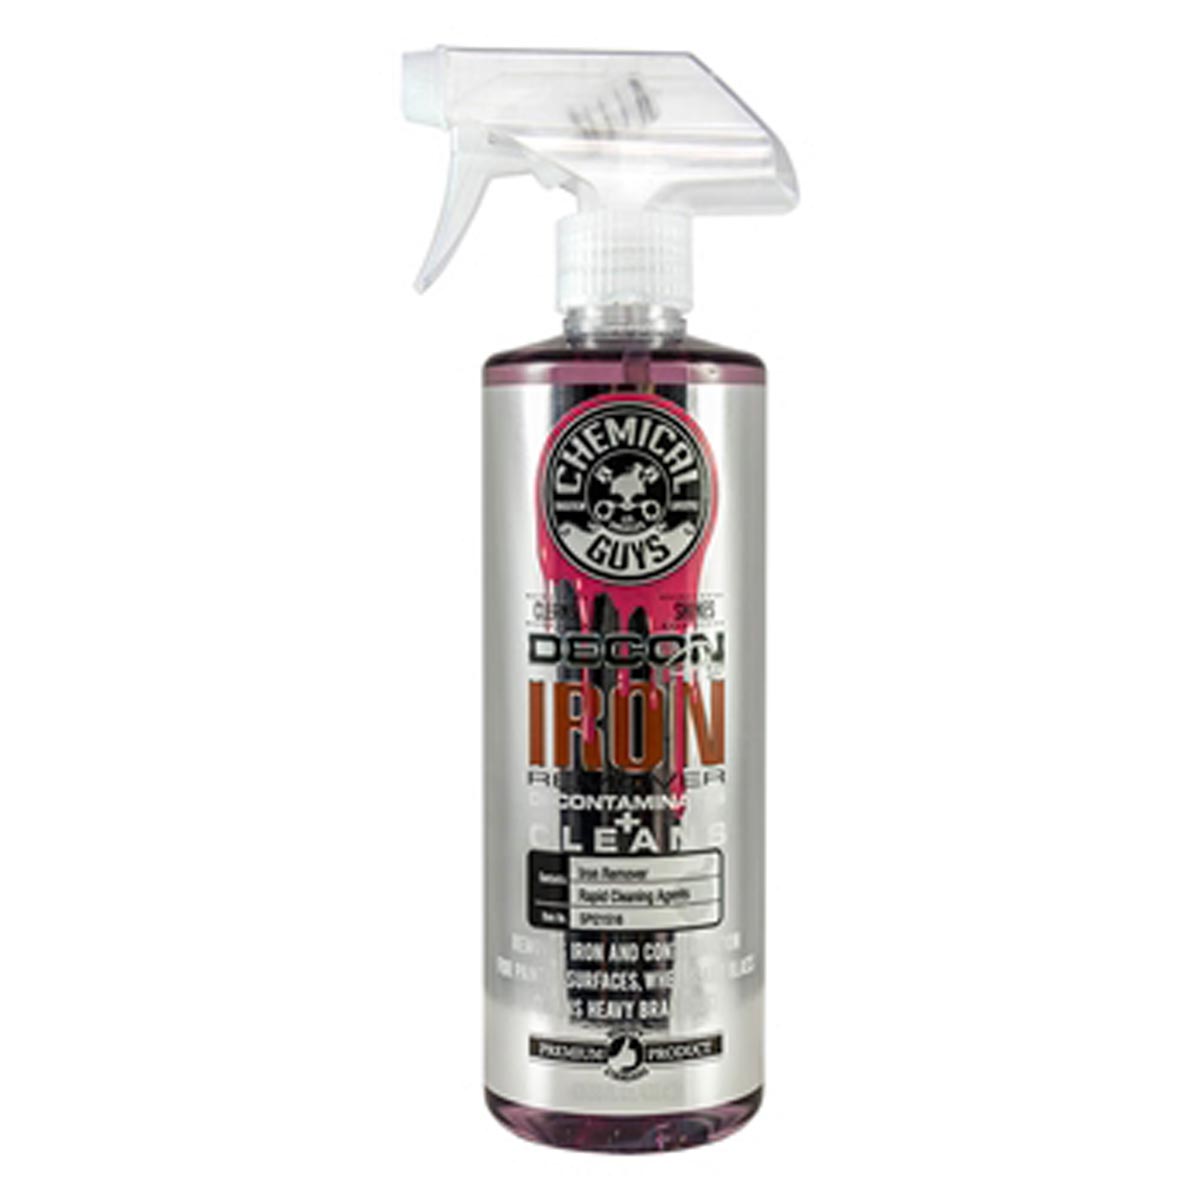 Chemical Guys Decontamination and Iron Remover - 16oz Bottle